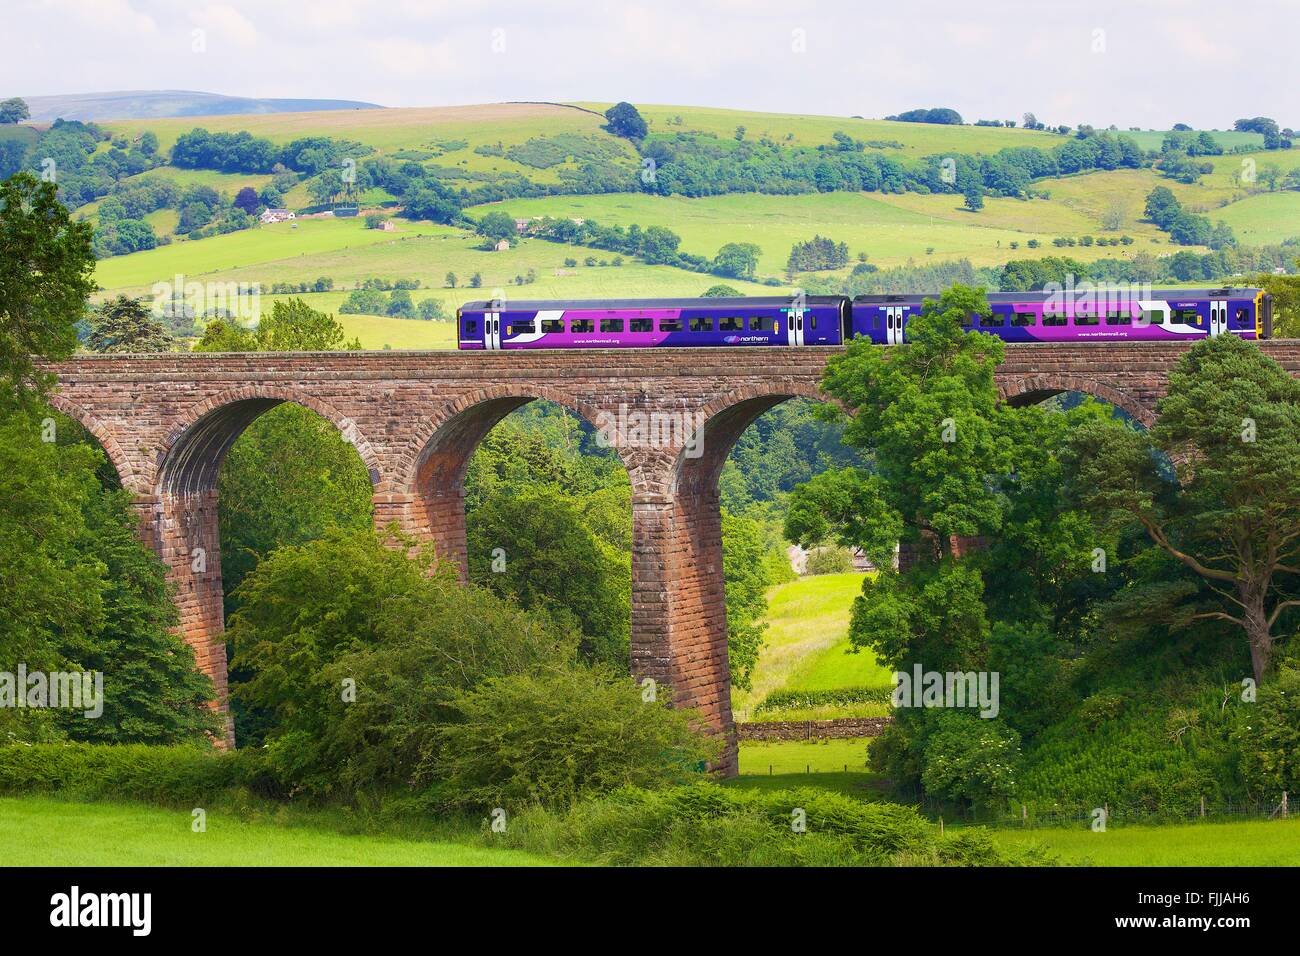 Settle to Carlisle Railway Line. Sprinter passenger diesel train passing over Dry Beck Viaduct, Eden Valley, Cumbria, England. Stock Photo